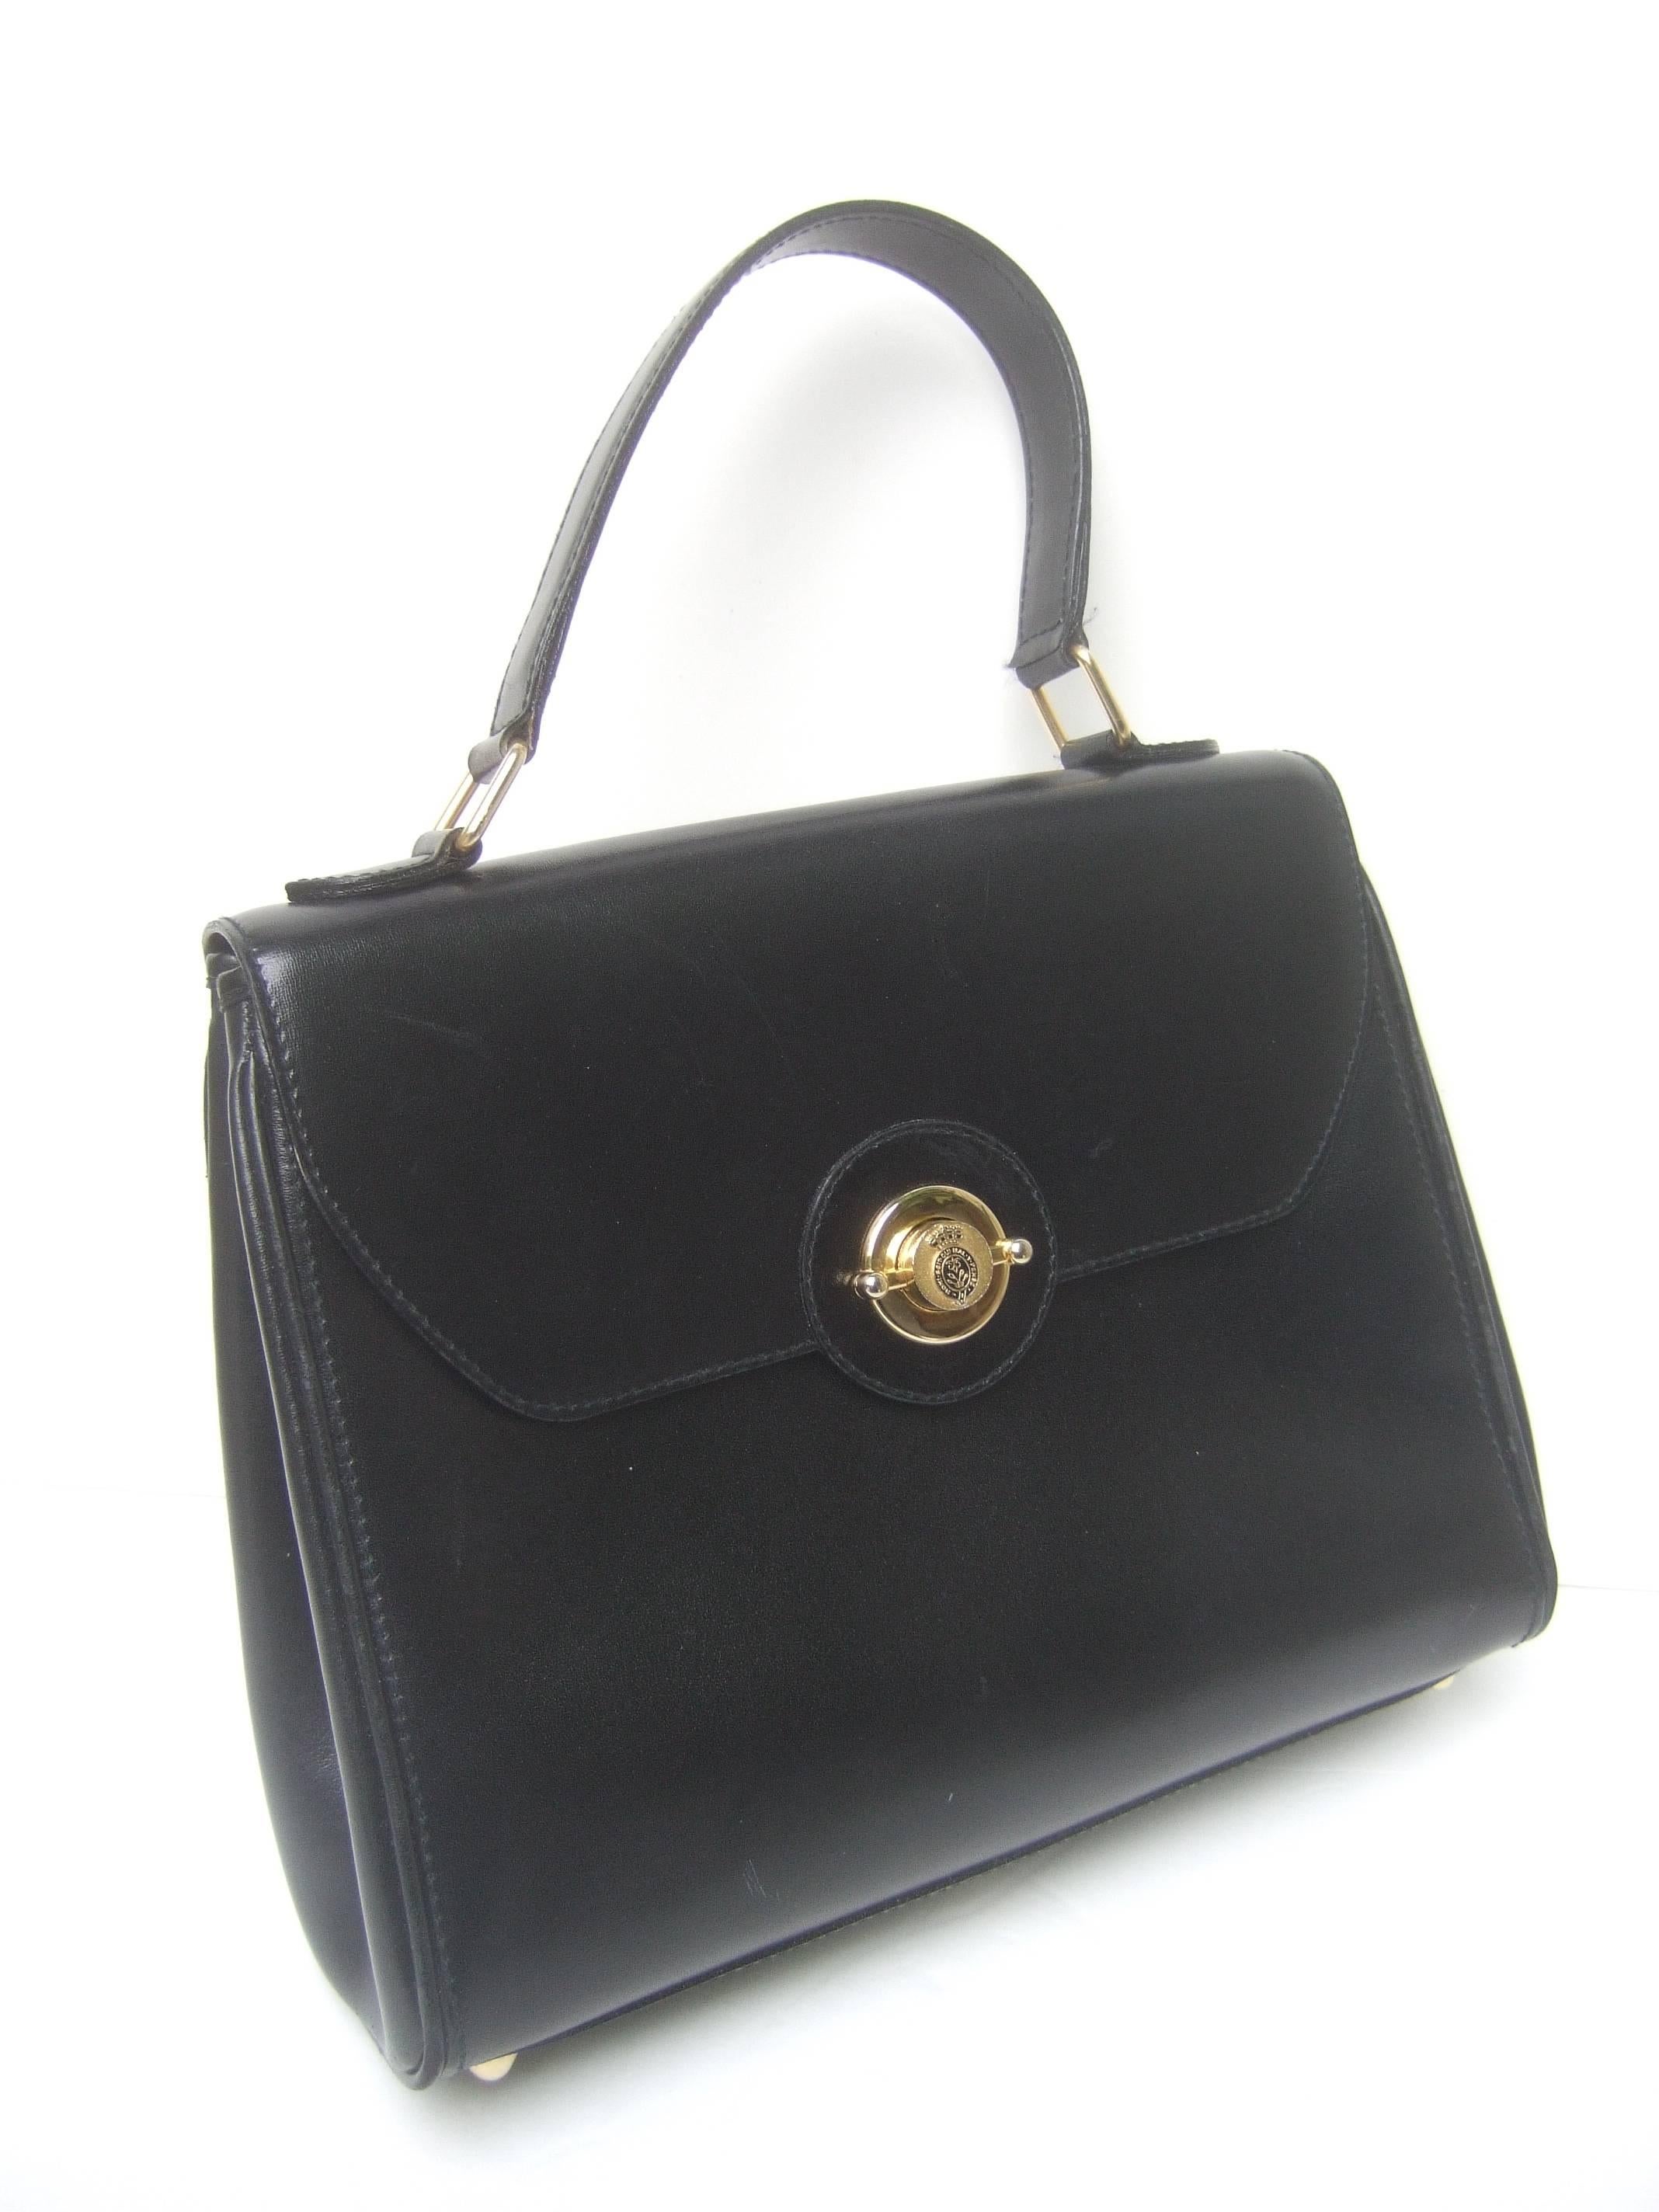 Saks Fifth Avenue Ebony Leather Handbag Made in Italy  For Sale 2